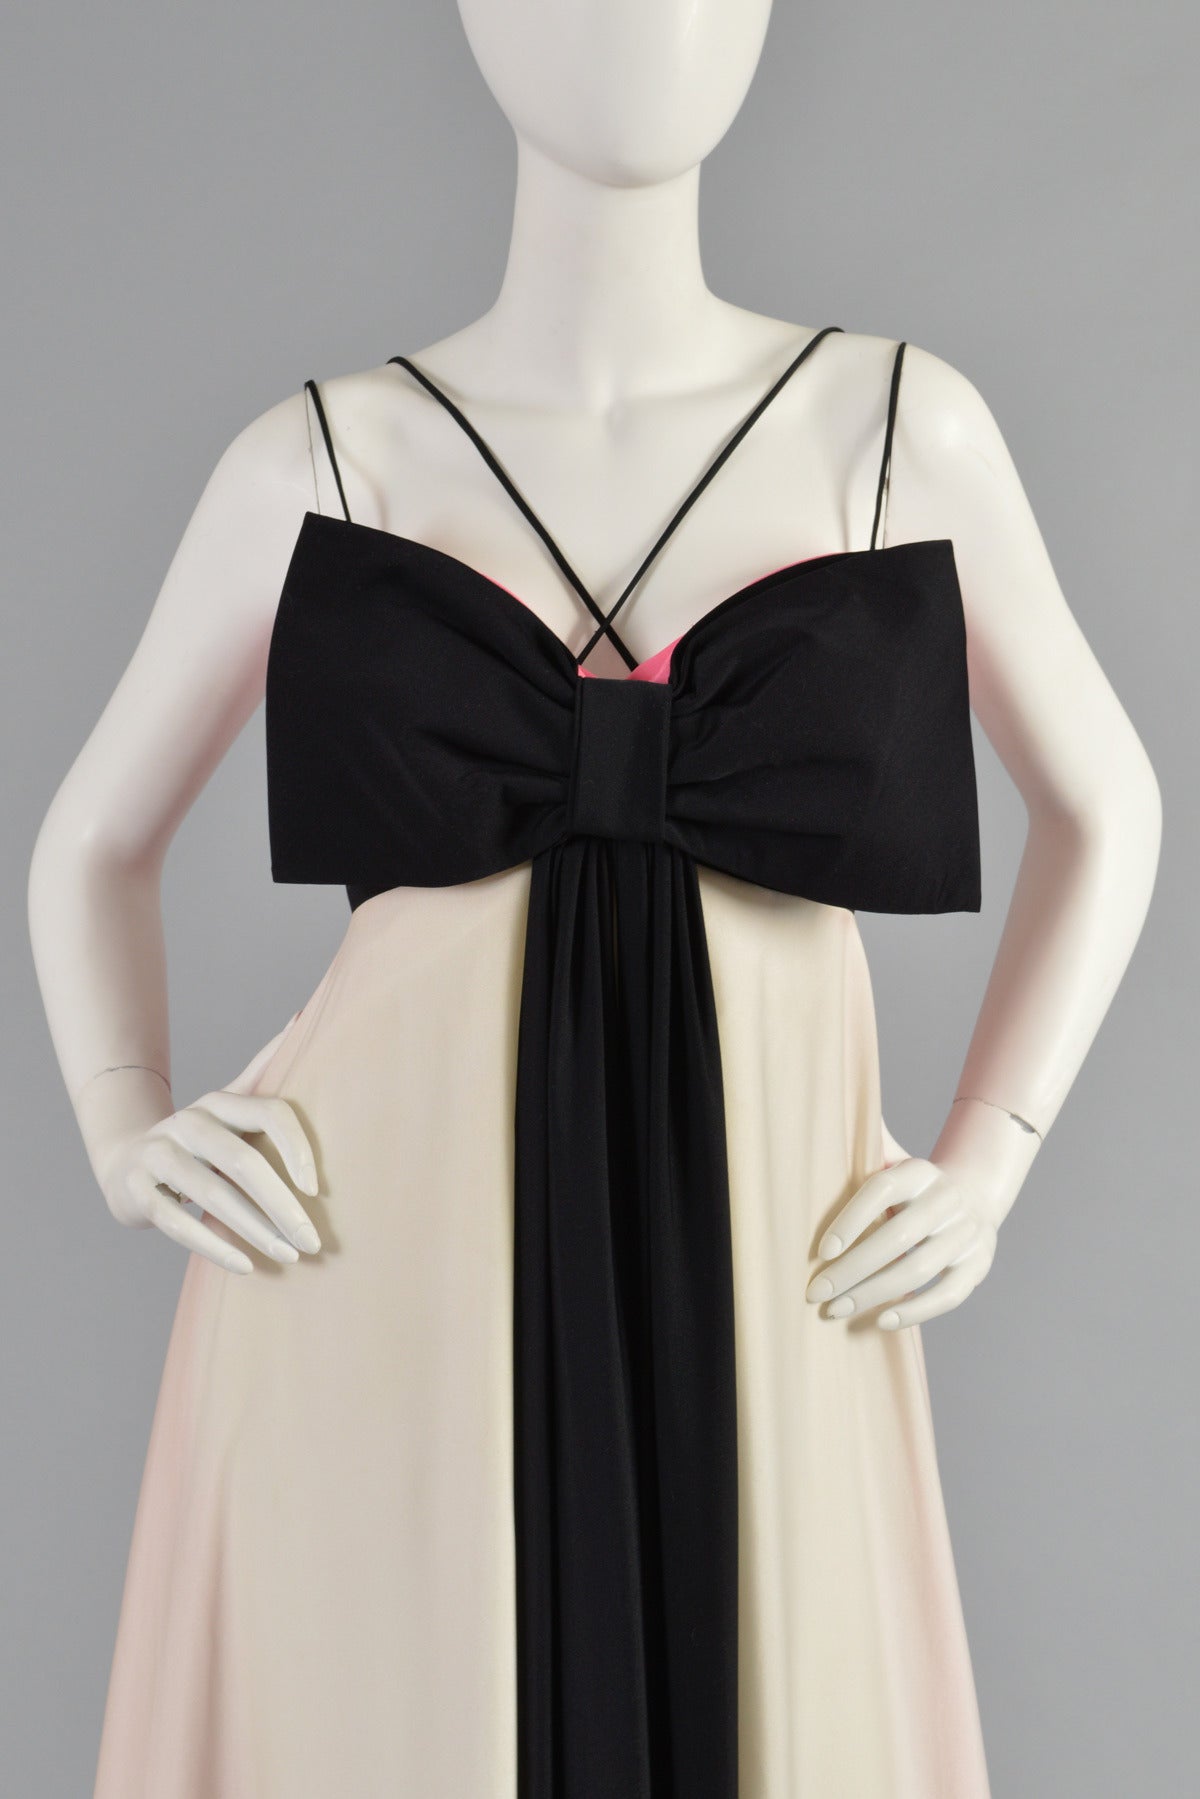 Les Wilk 1970's Colorblock Evening Gown with Massive Bow For Sale 1